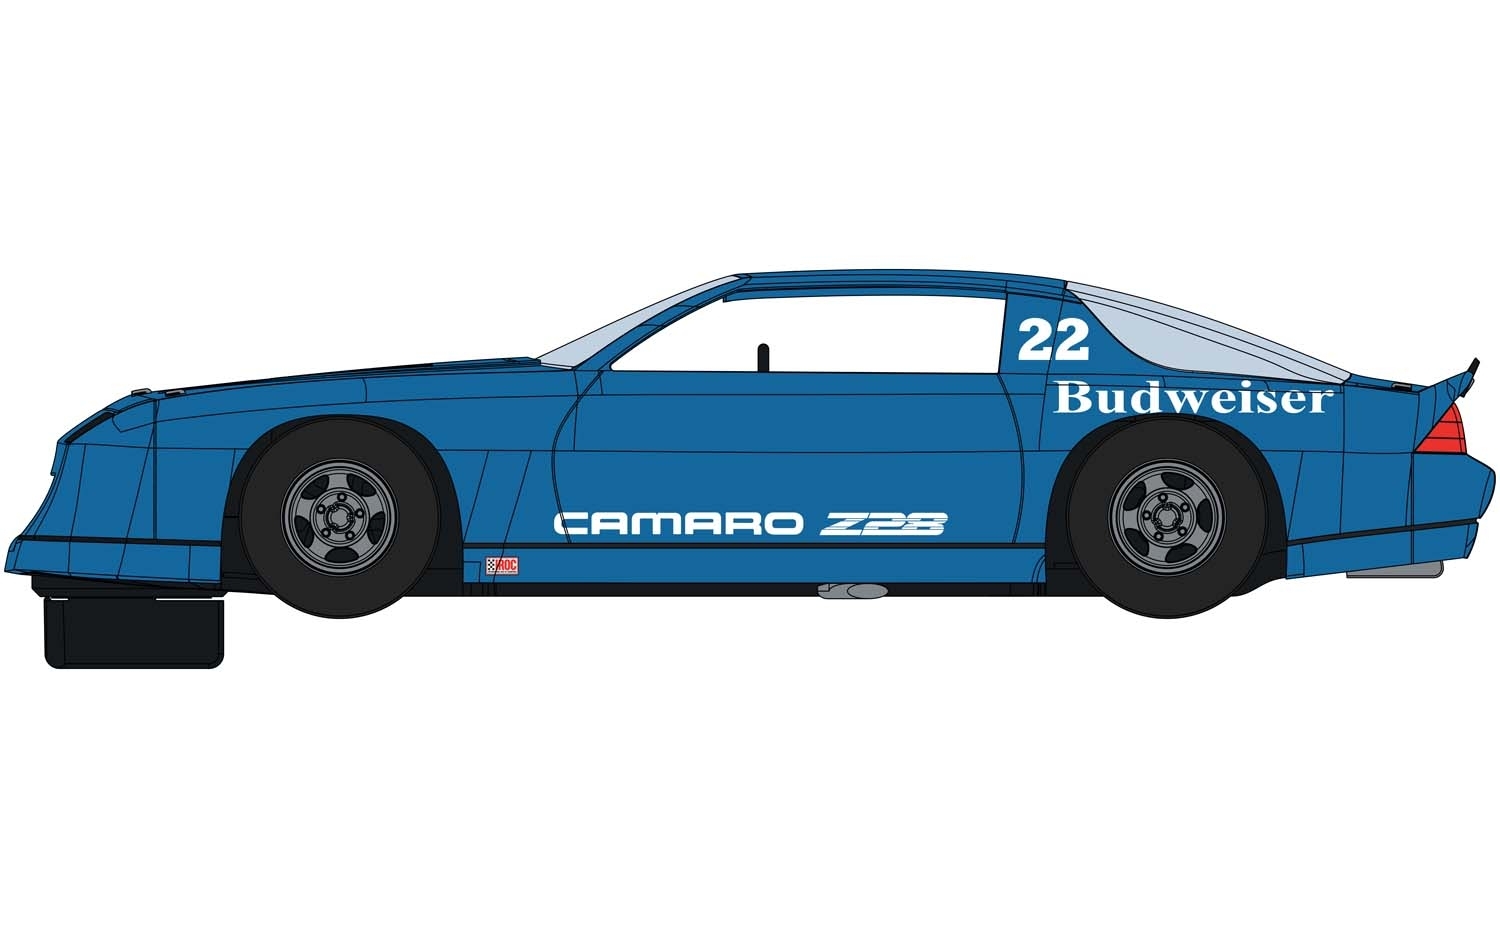 1/32 scale slot car decals for the Scalextric IROC Camaro 